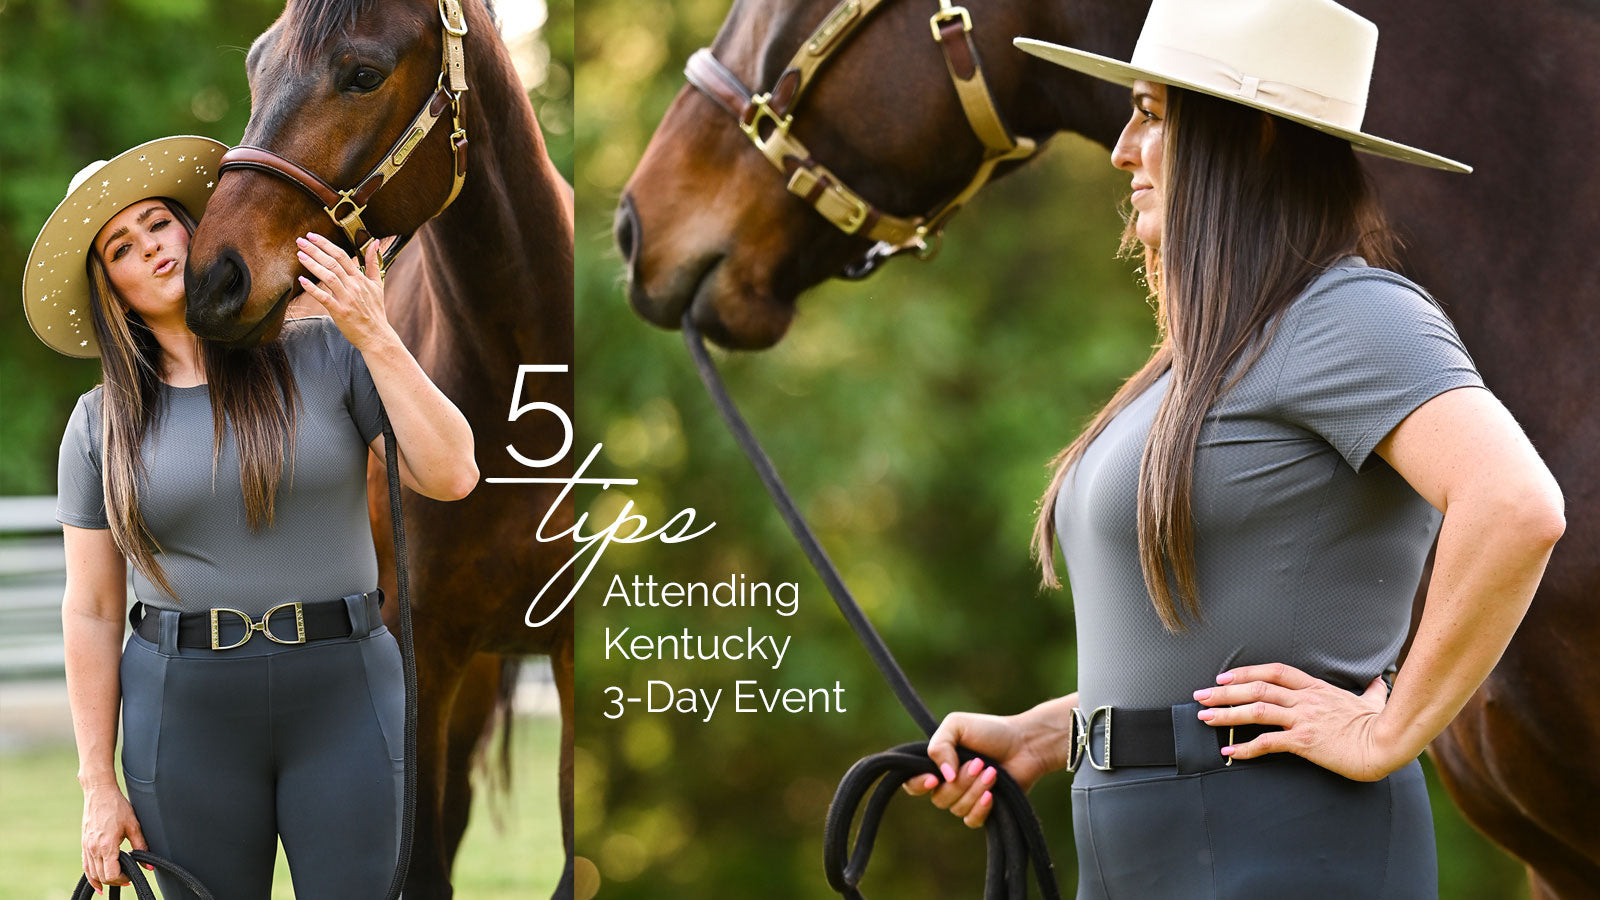 5 Tips for Attending Kentucky 3-Day Event